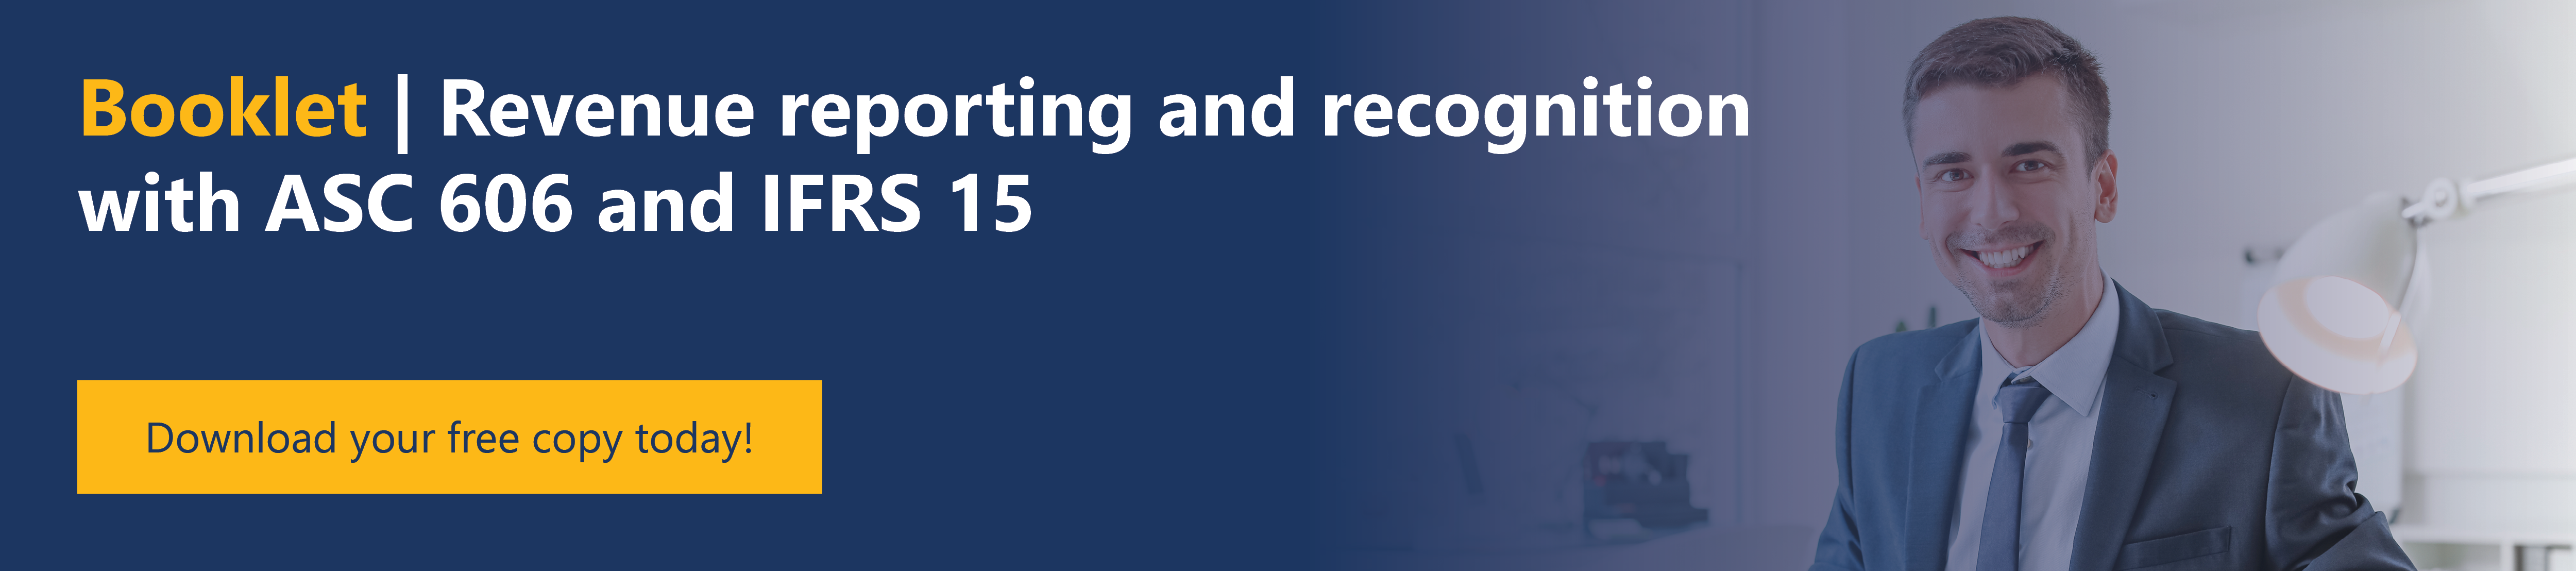  Booklet | Revenue reporting and recognition with ASC 606 and IFRS 15